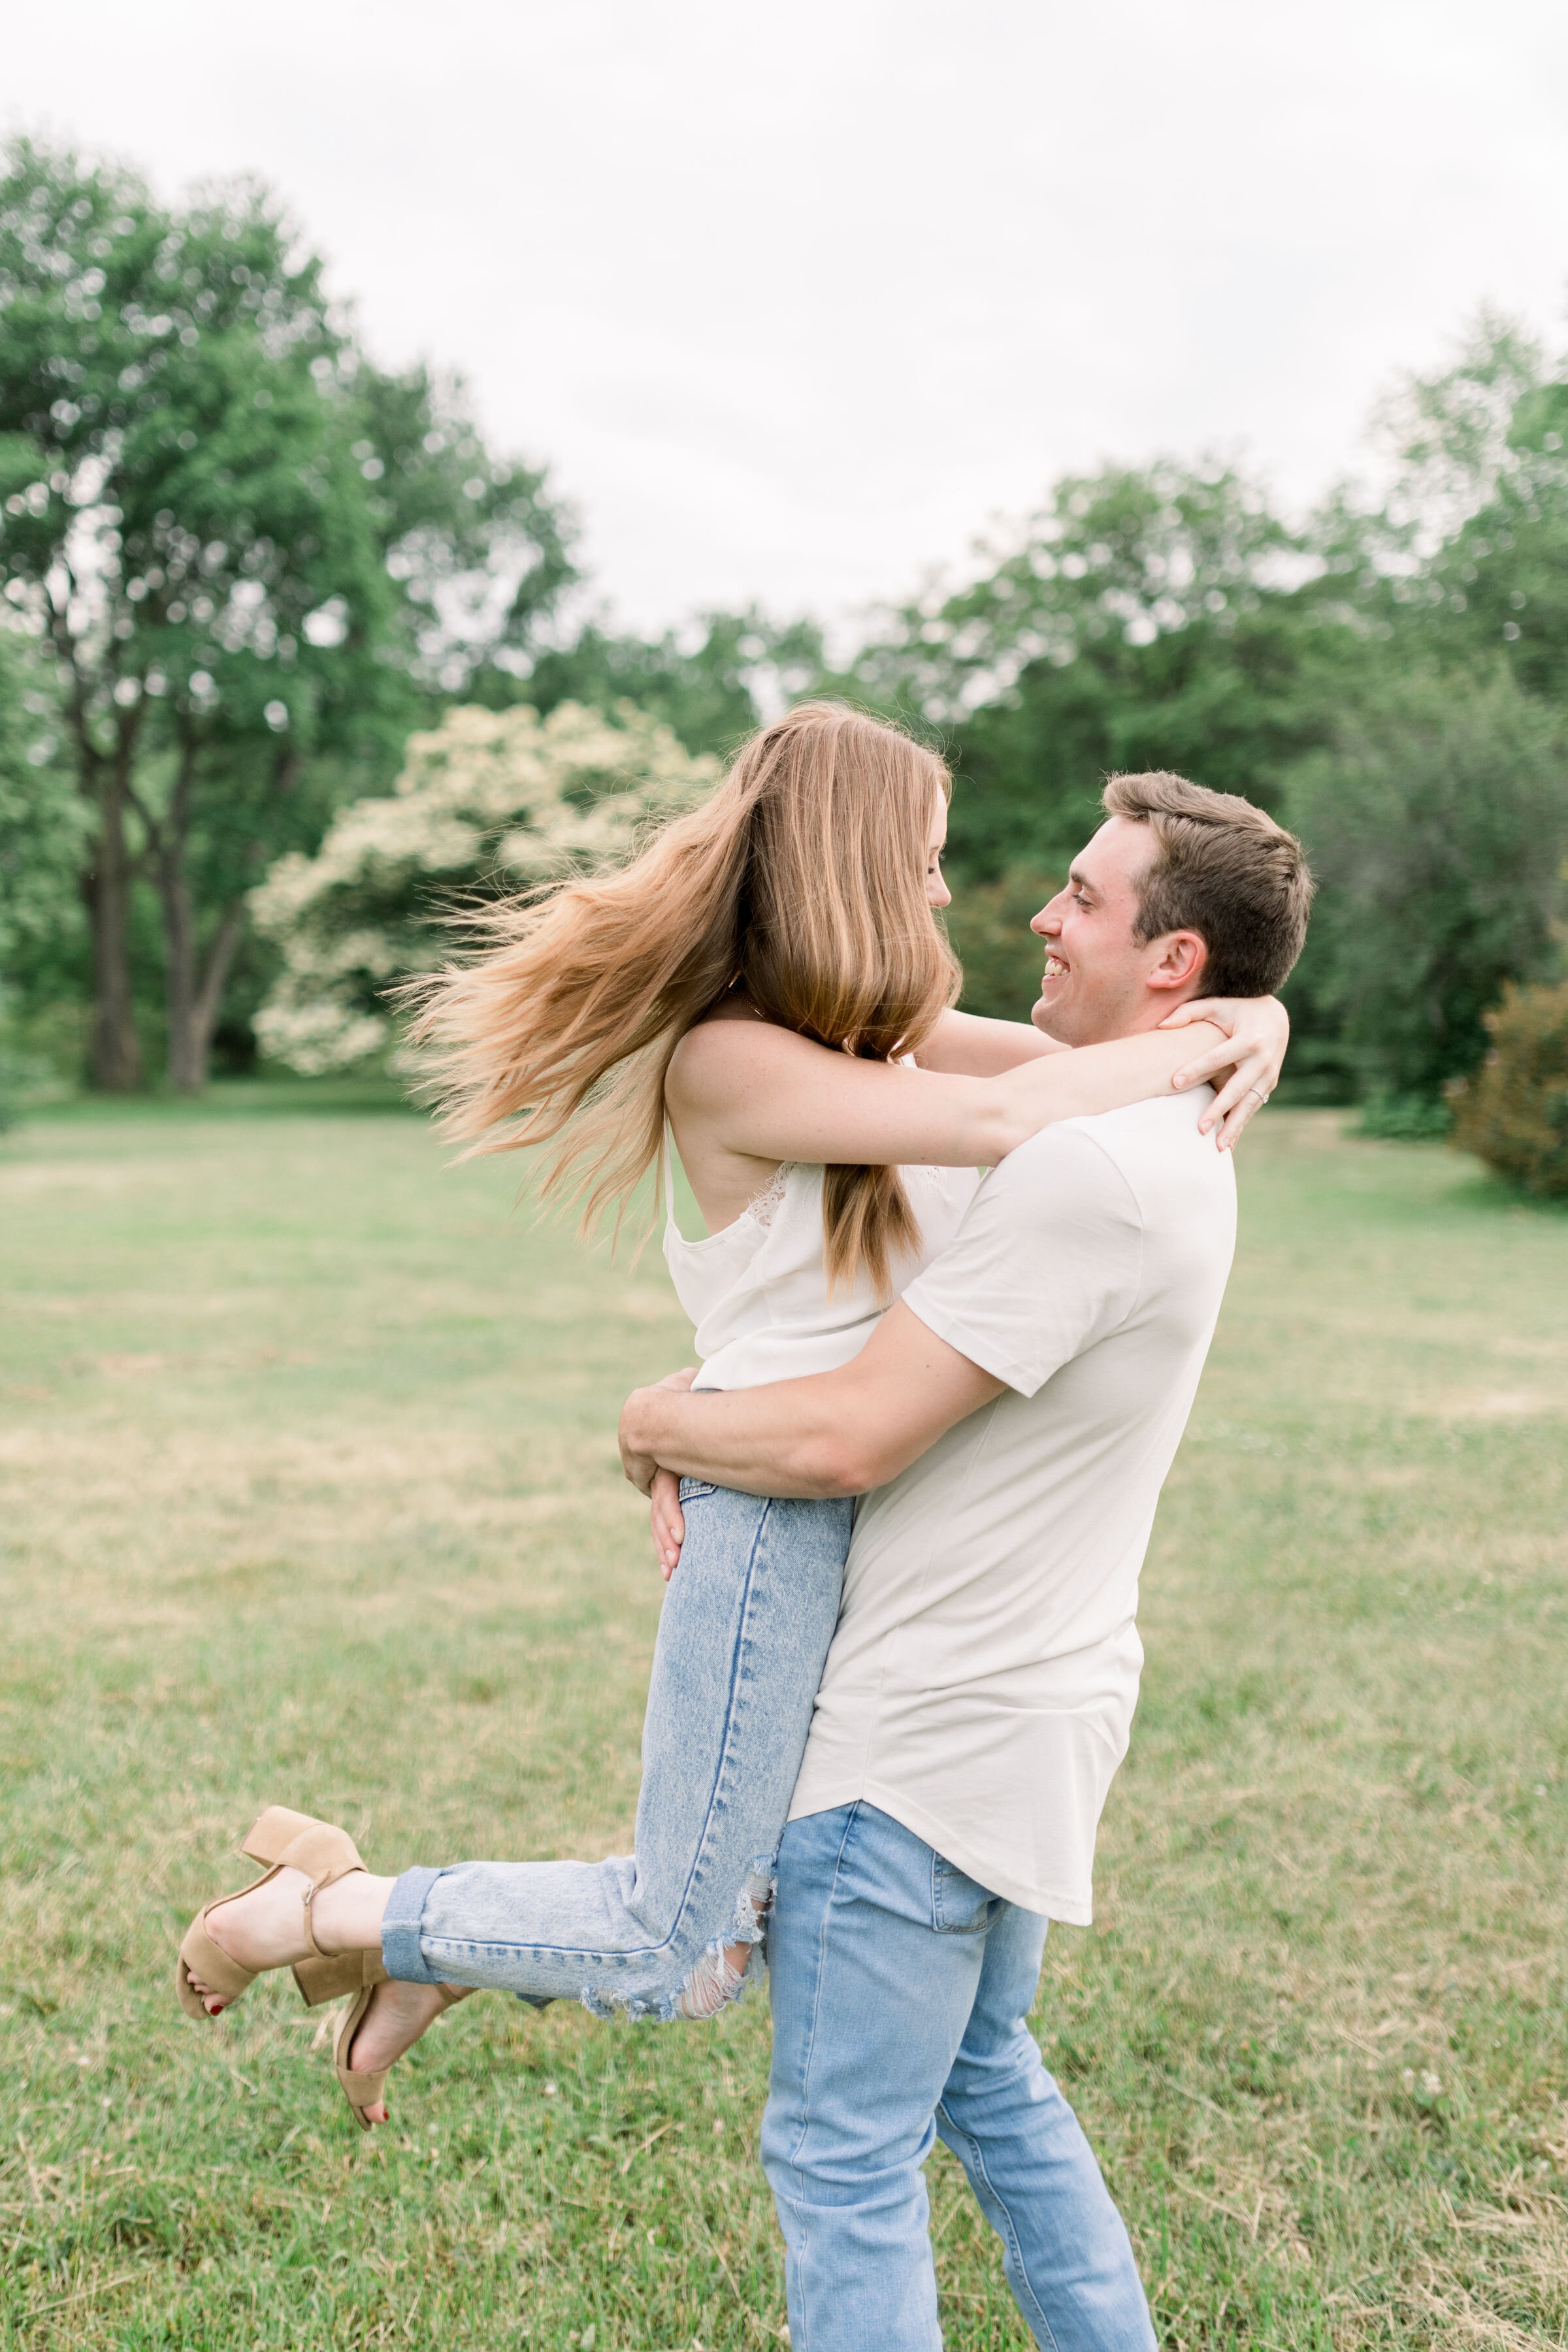  During this playful engagement session with Chelsea Mason Photography in Ottawa, Ontario, this soon-to-be groom picks up his fiancé and spins. playful engagement poses groom picks up wife couples posing Ottawa photographer #ChelseaMasonPhotography #